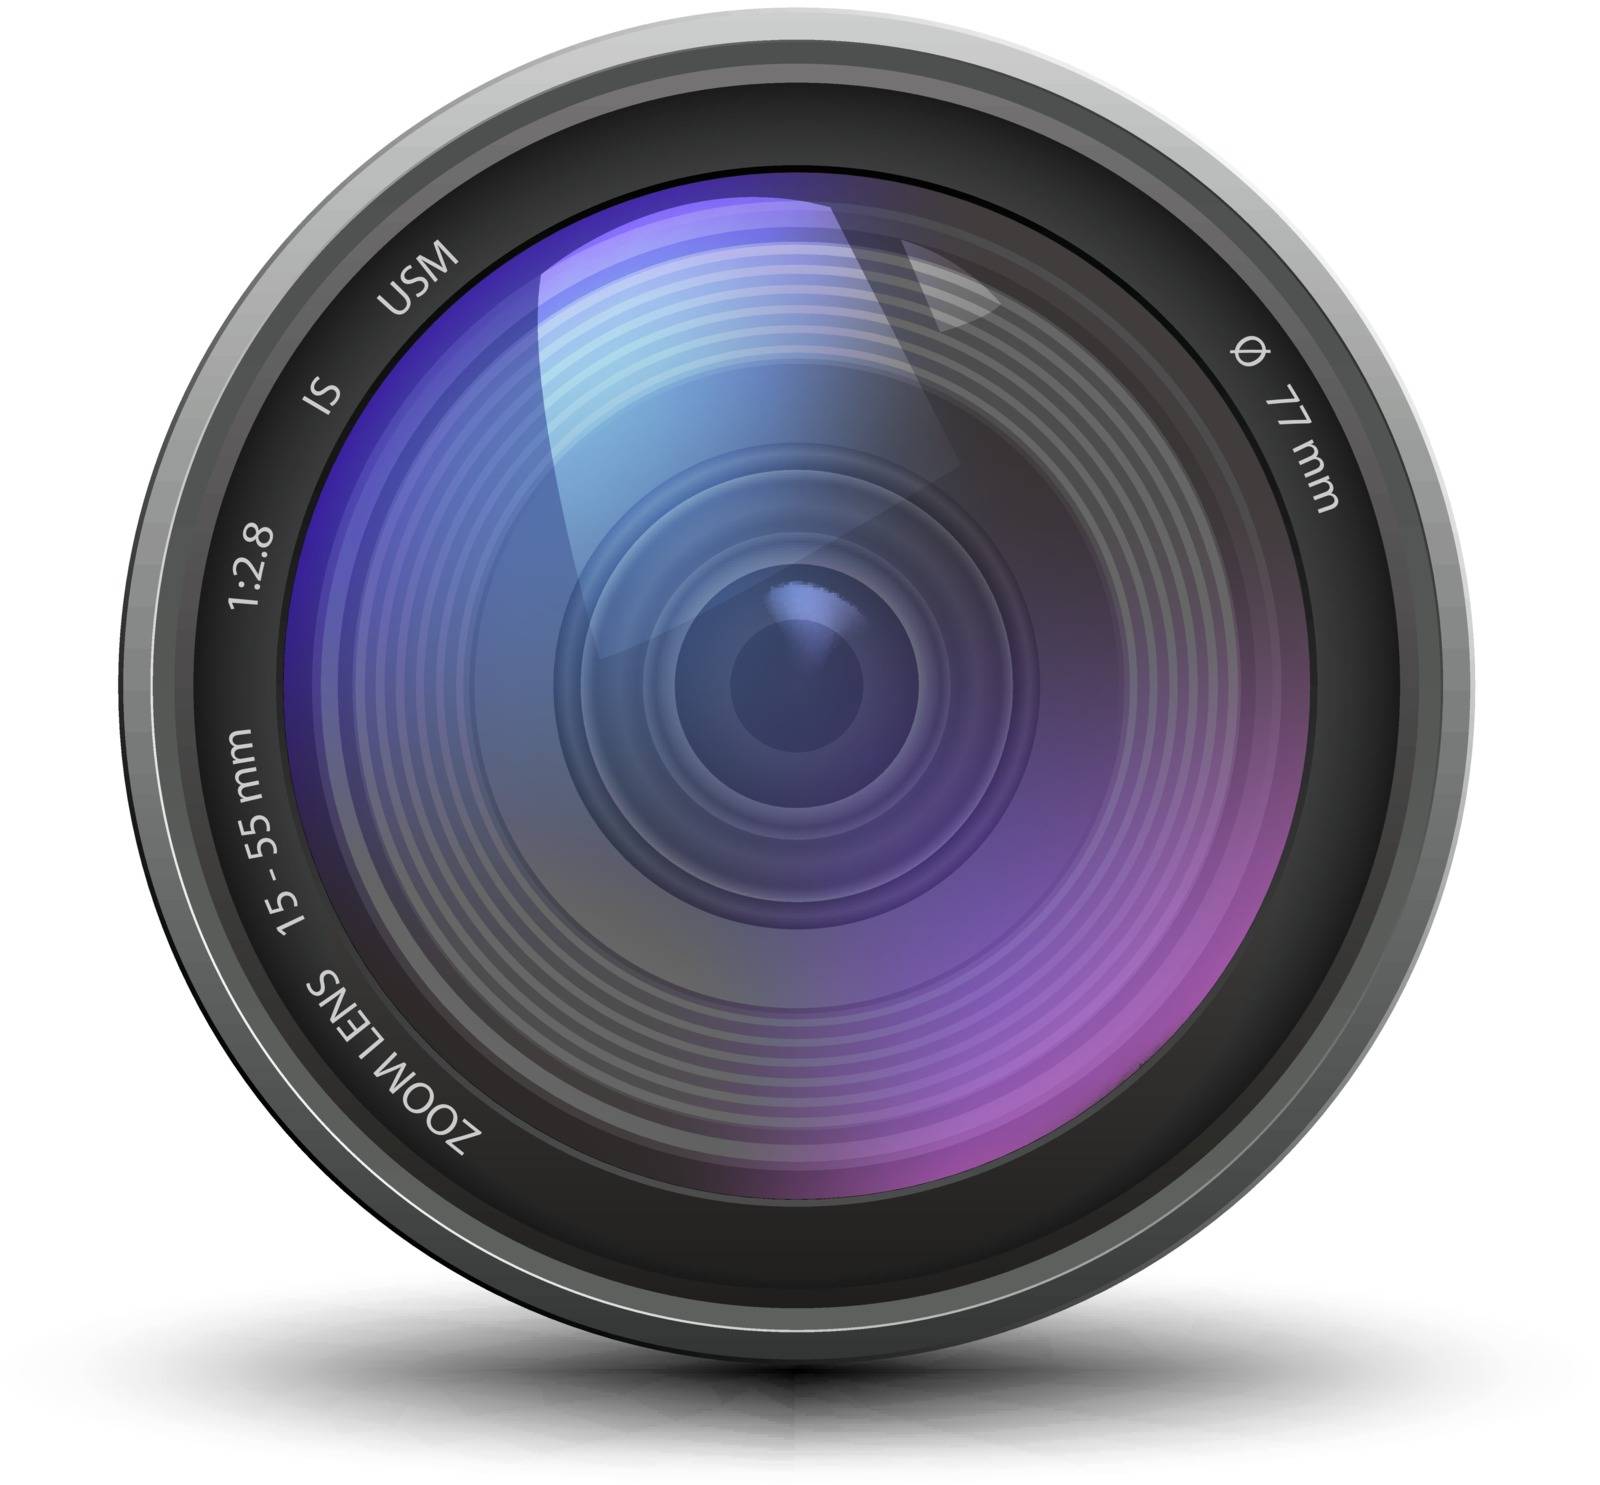 Realistic illustration of camera zoom lens with colorful reflection by mischoko